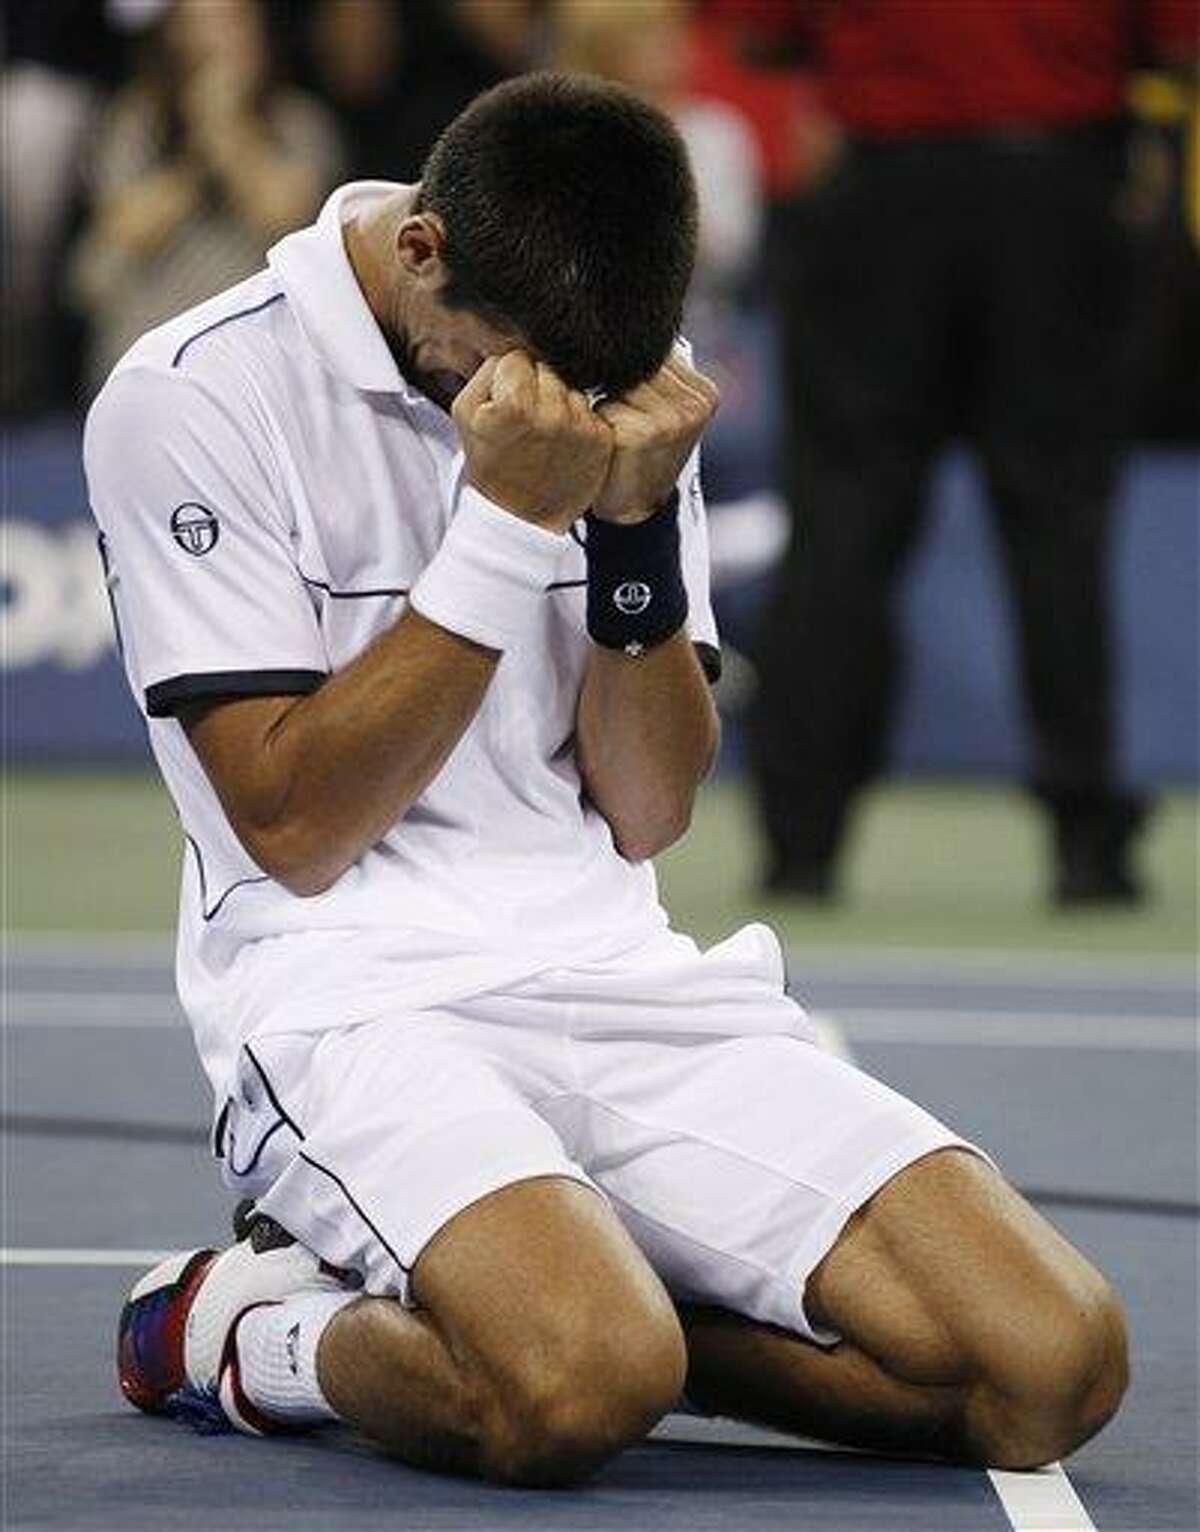 Novak Djokovic of Serbia reacts after winning the men's championship match against Rafael Nadal of Spain at the U.S. Open tennis tournament in New York, Monday, Sept. 12, 2011. (AP Photo/Charles Krupa)